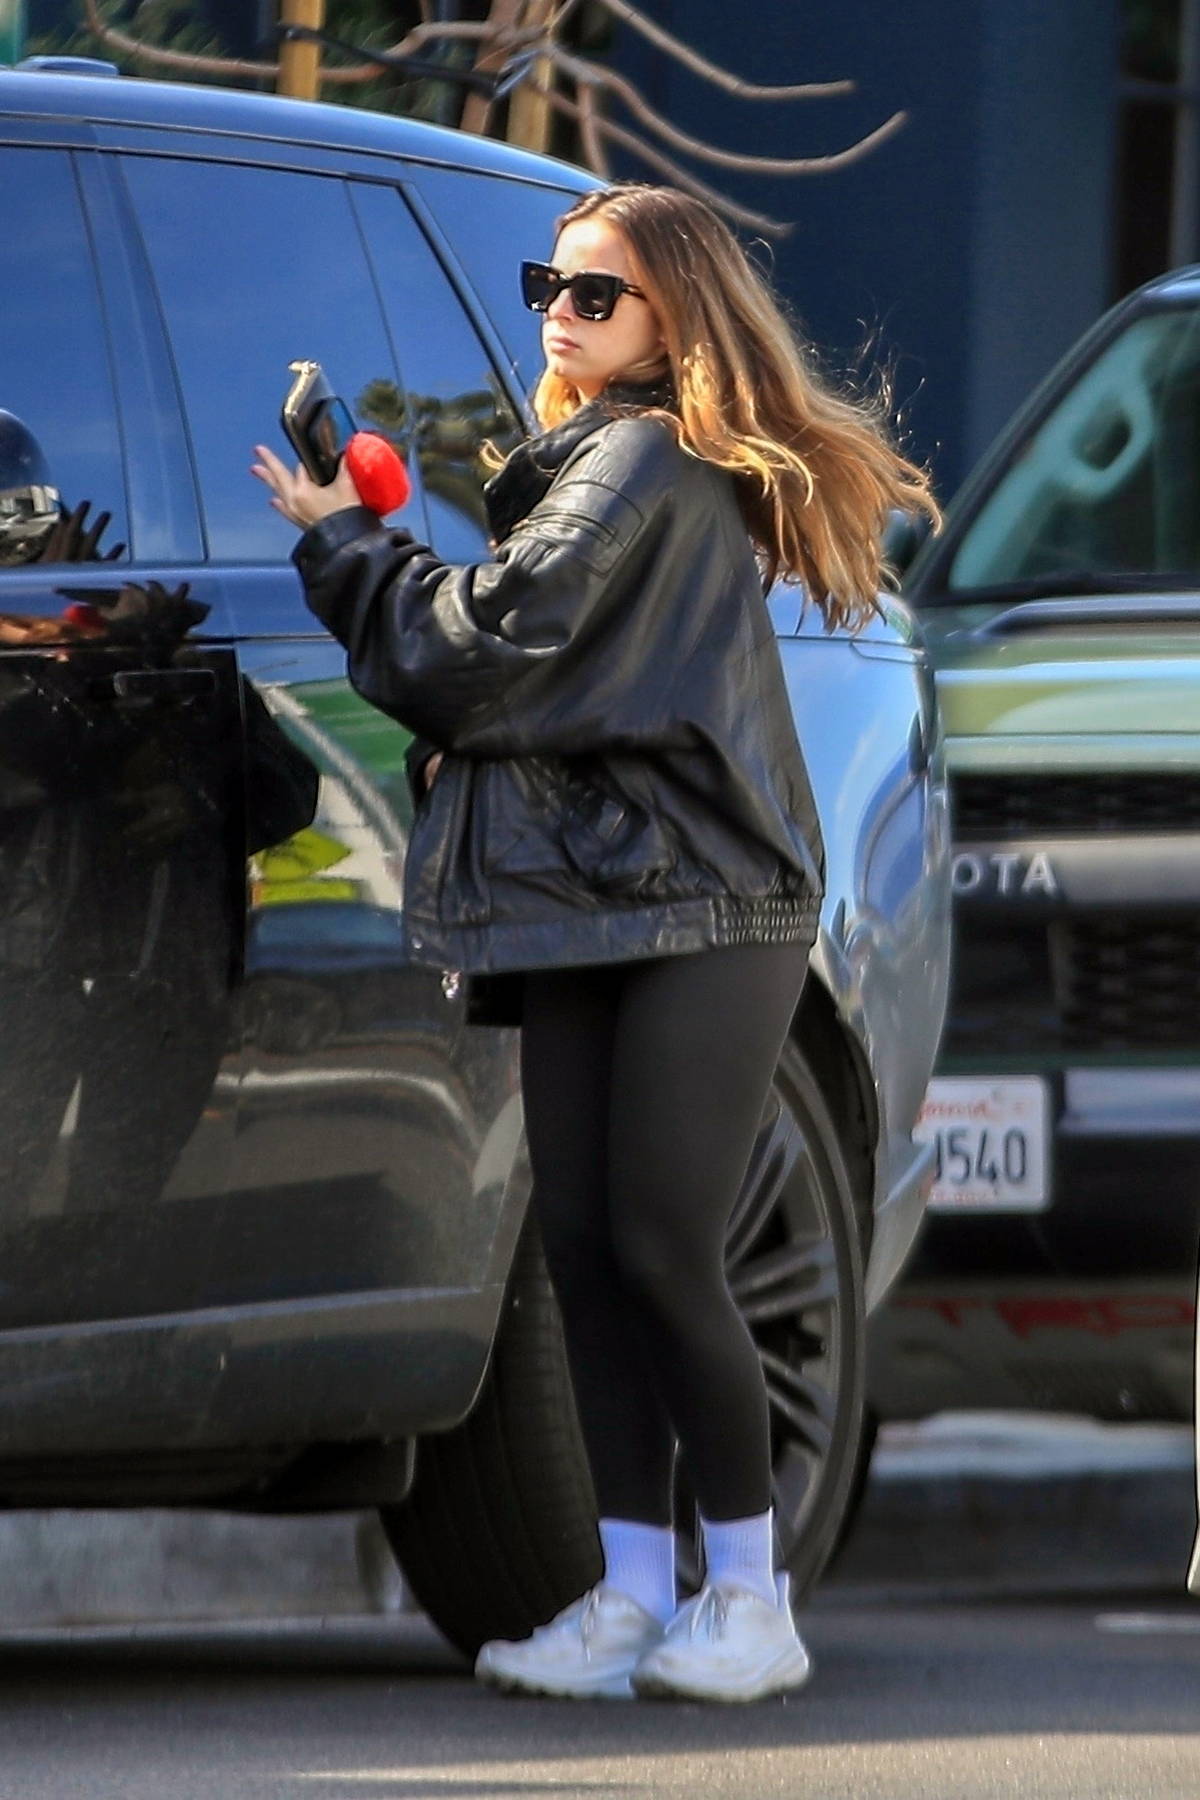 Addison Rae rocks a leather jacket and leggings while out for some